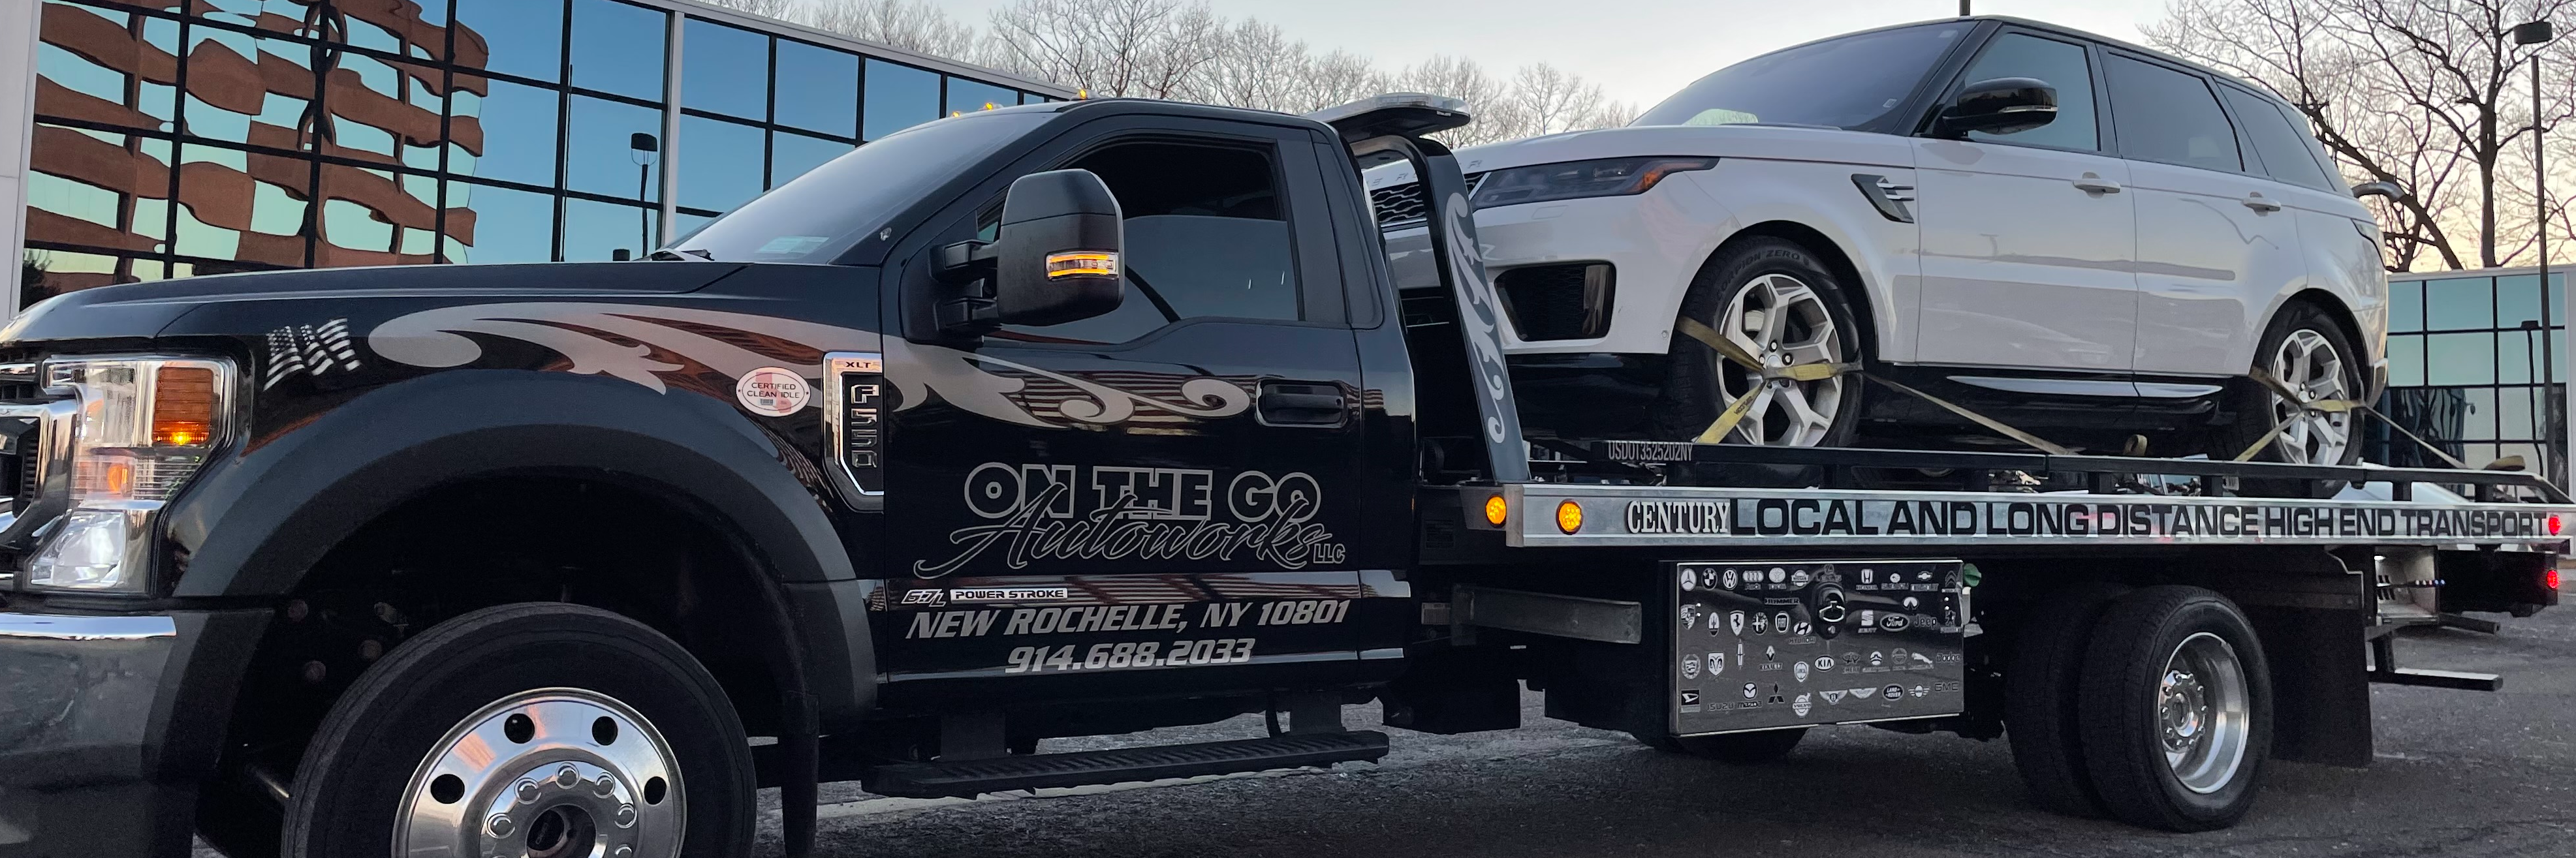 ON THE GO AUTOWORKS LLC Towing.com Profile Banner